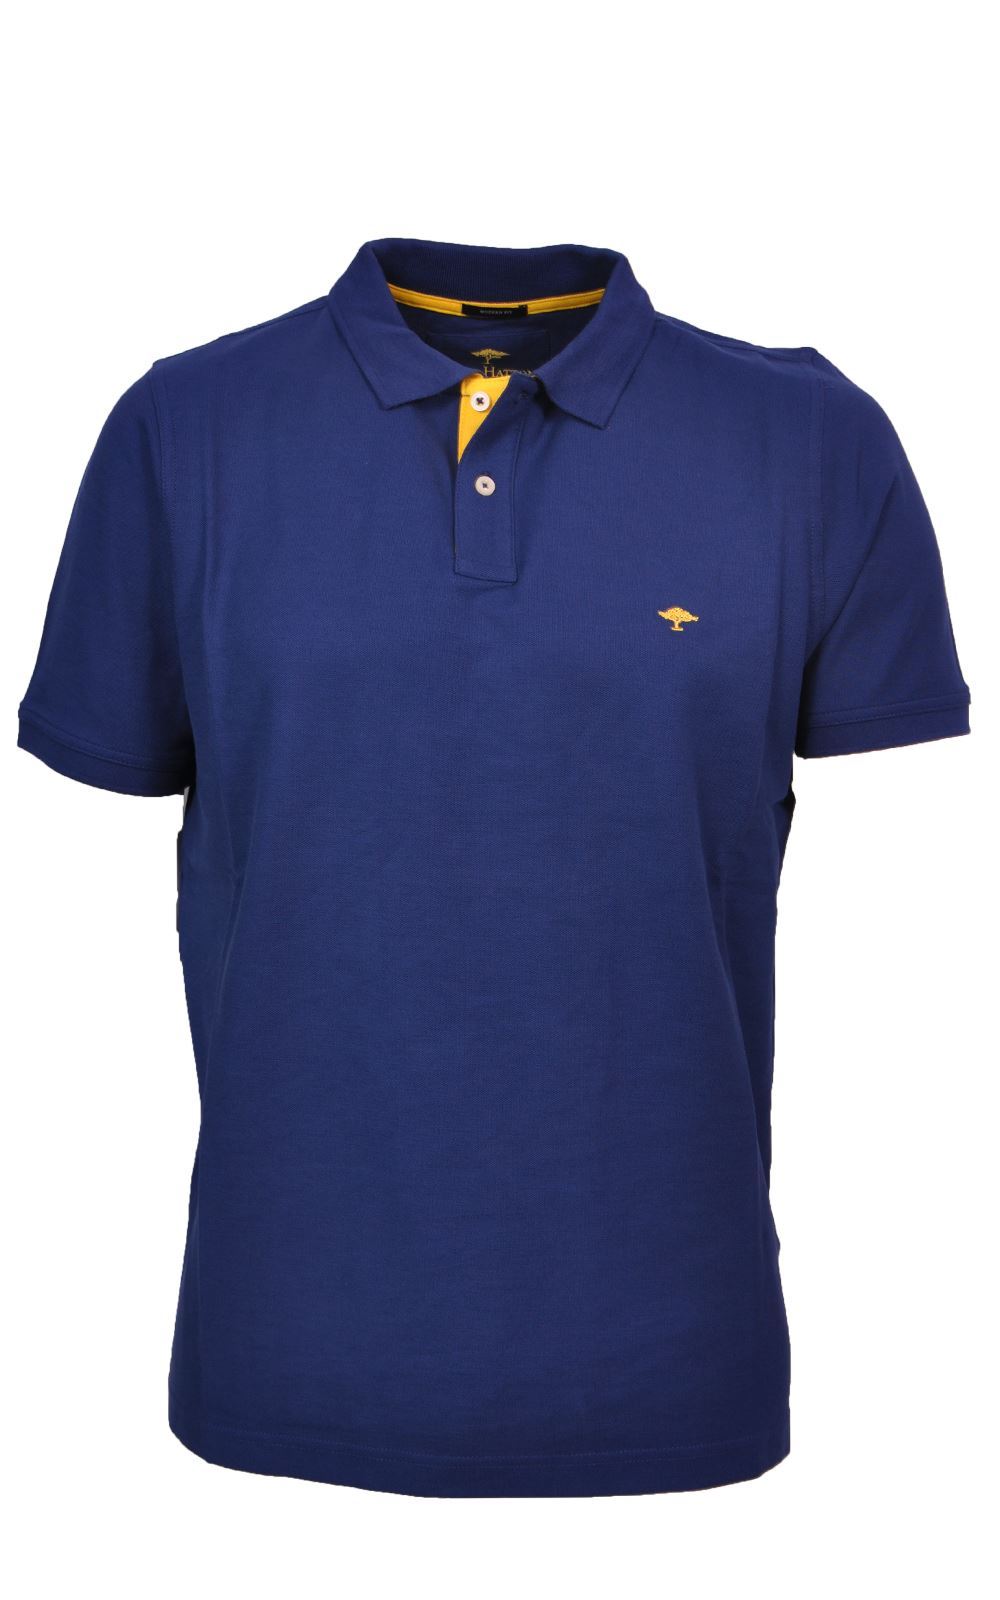 Picture of Fynch-hatton Polo Shirt 1313-1711